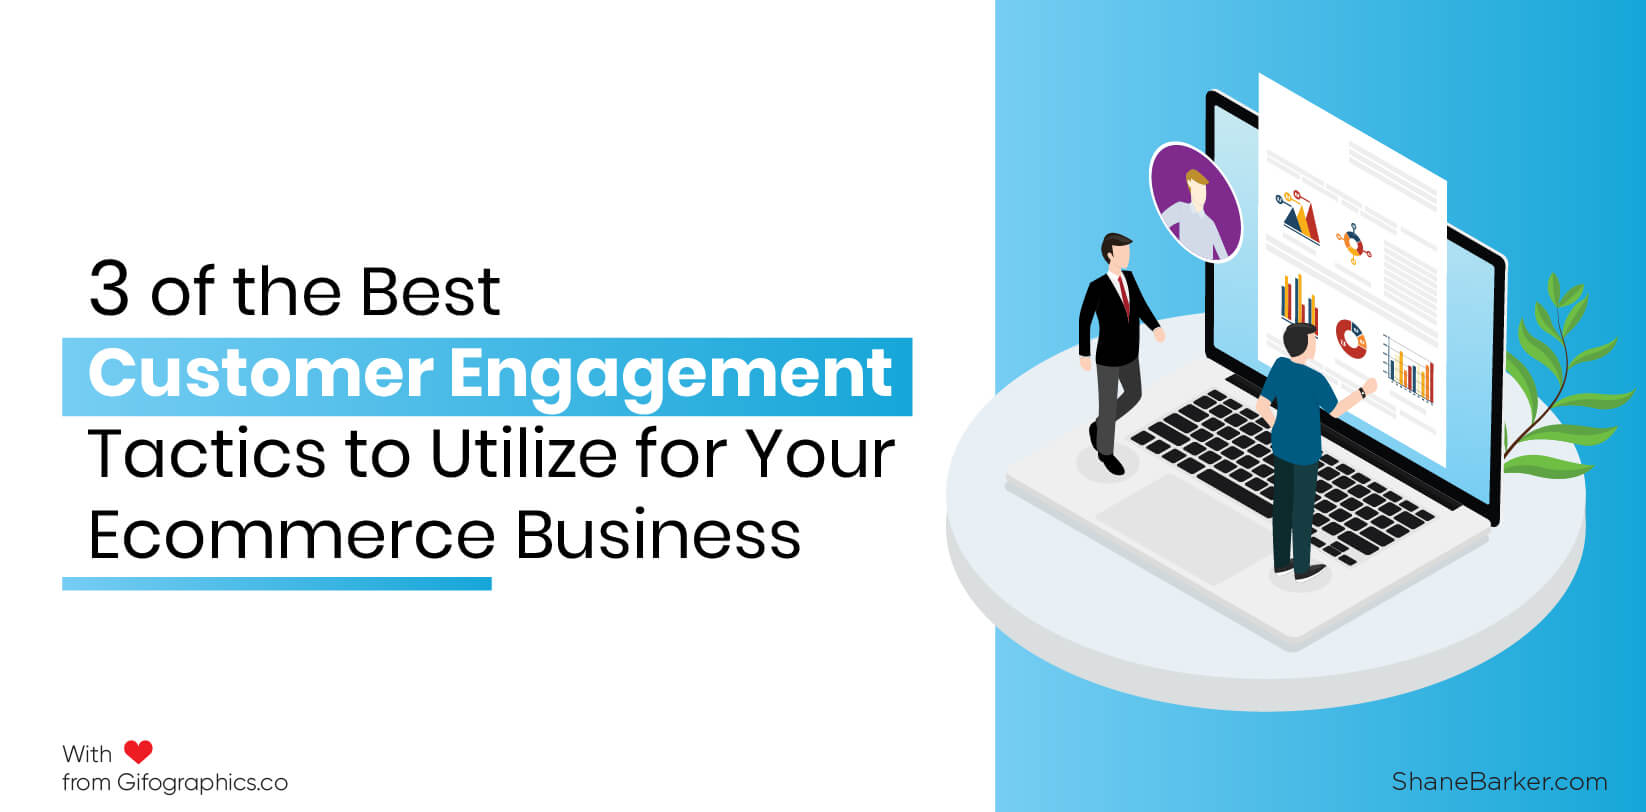 3 of the best customer engagement tactics to utilize for your ecommerce business